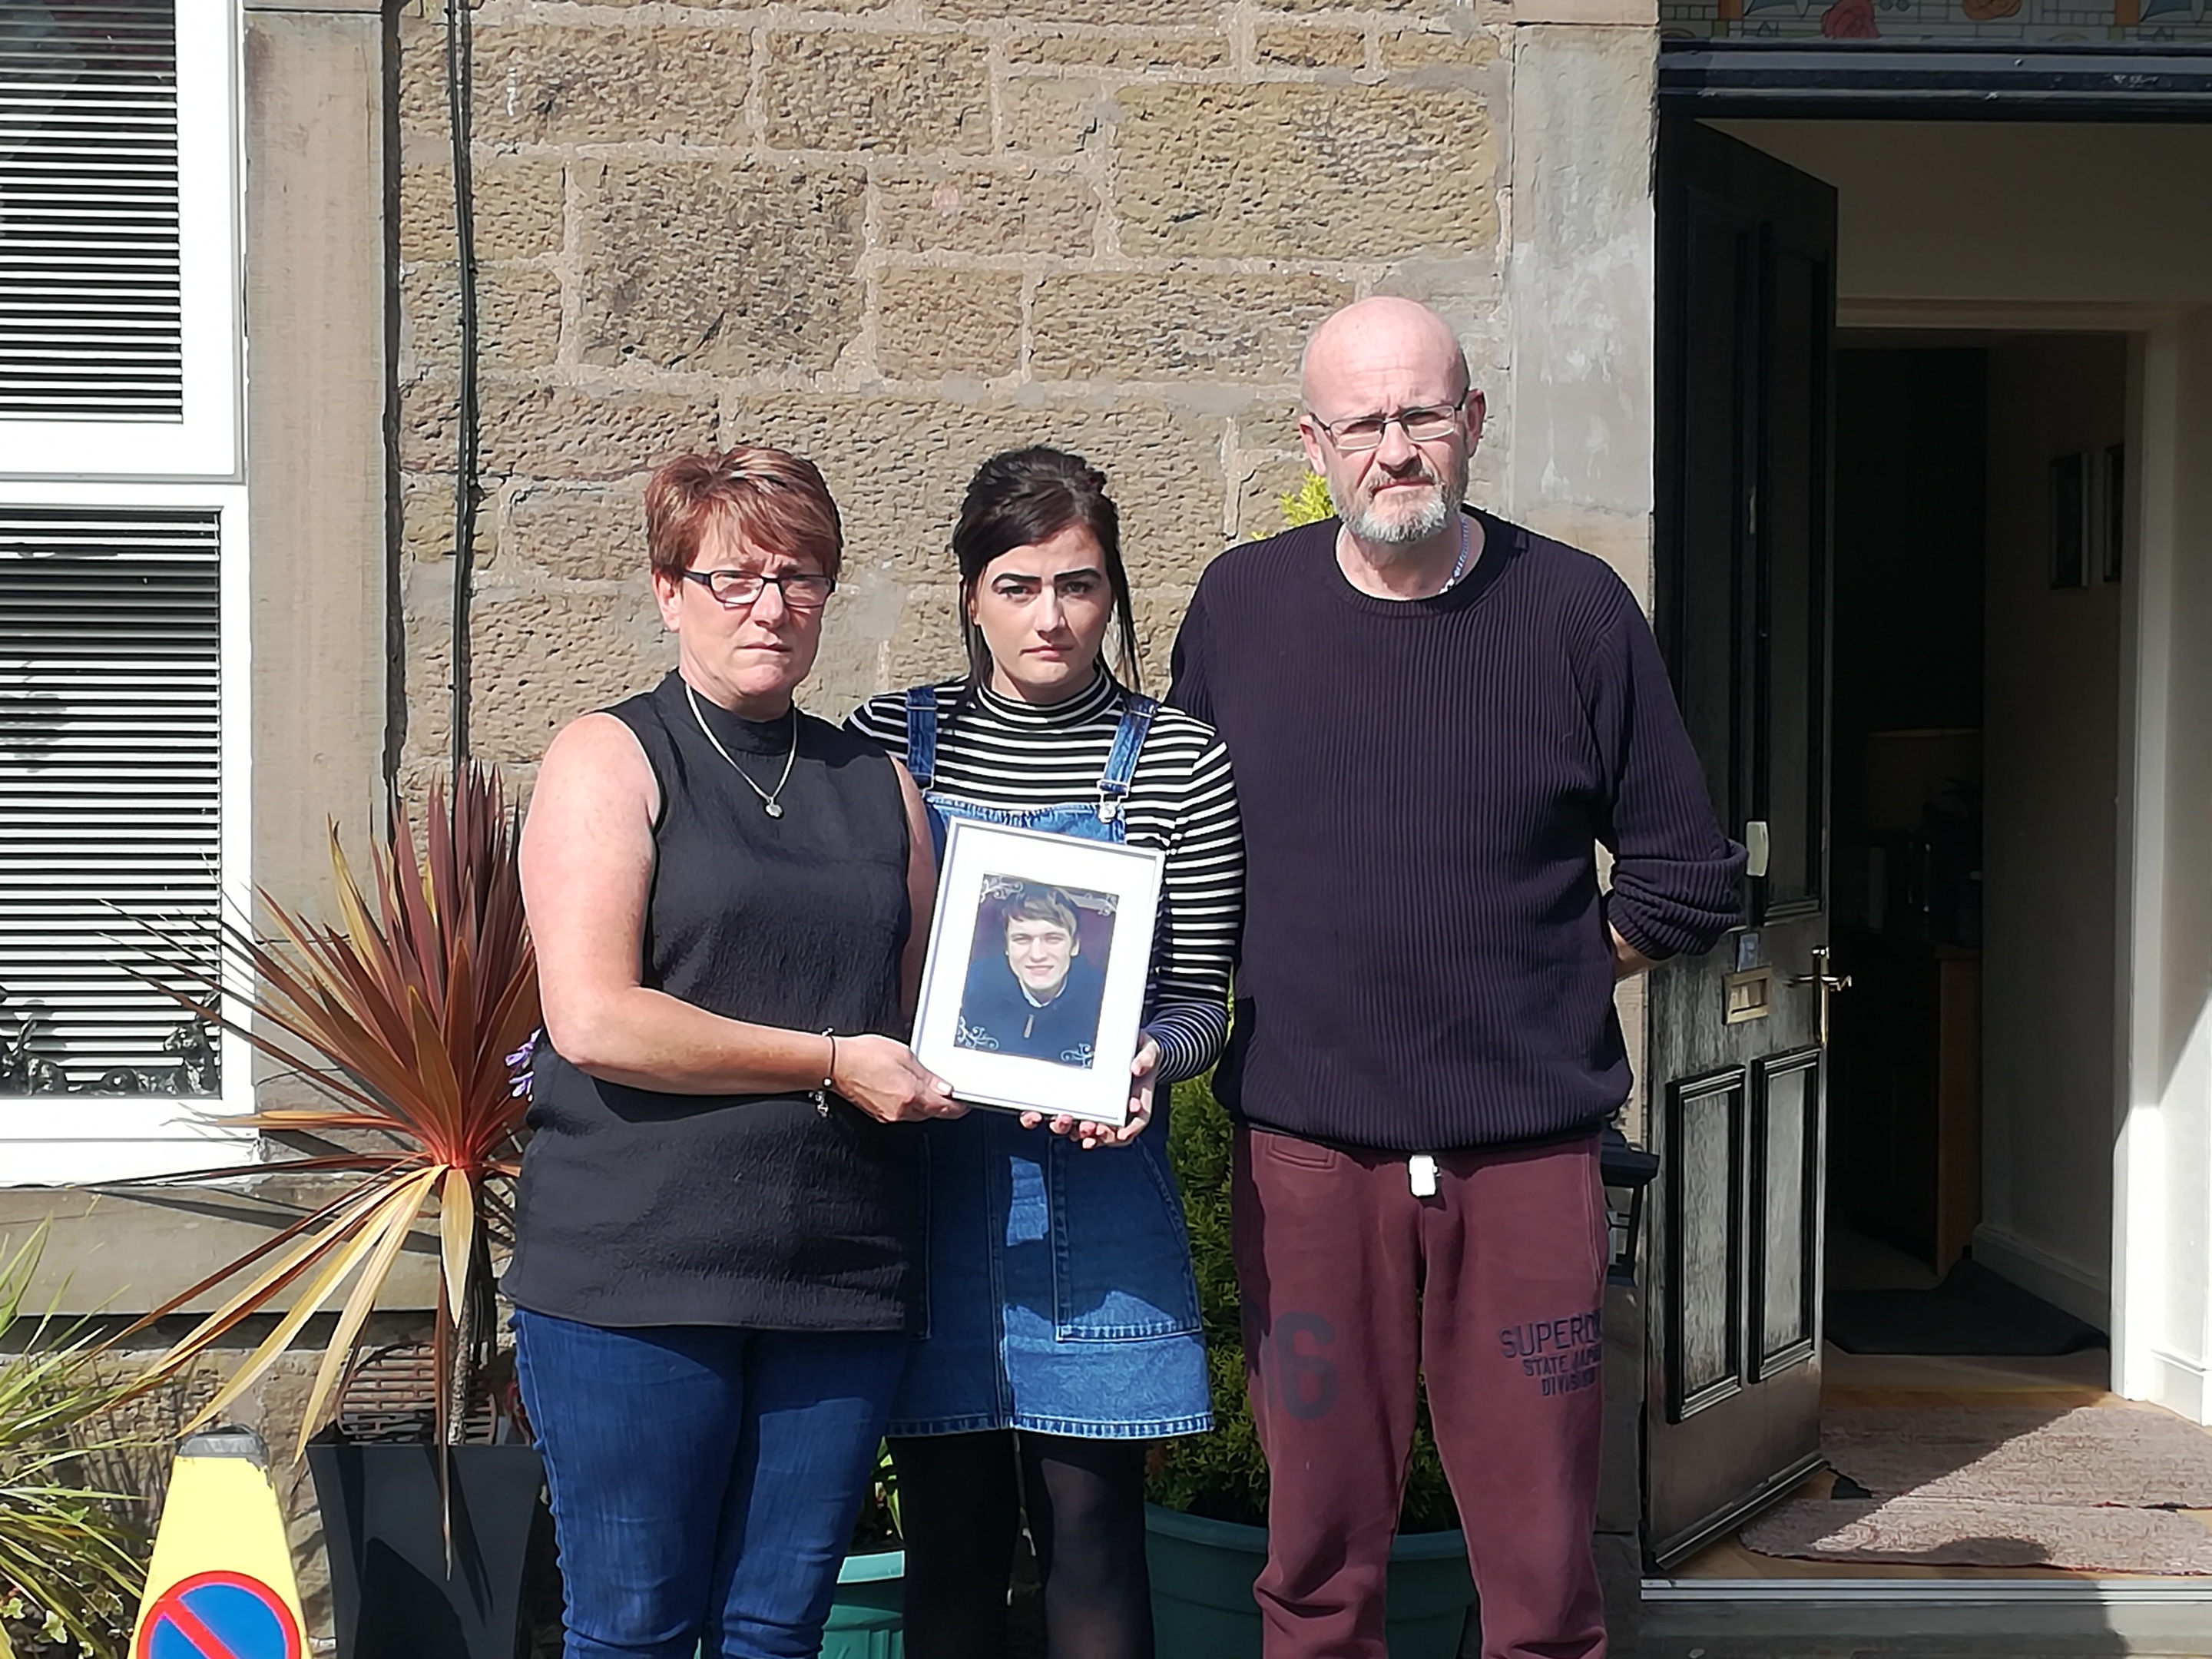 The Welsh family hope their efforts can lead to enhanced mental health provision.